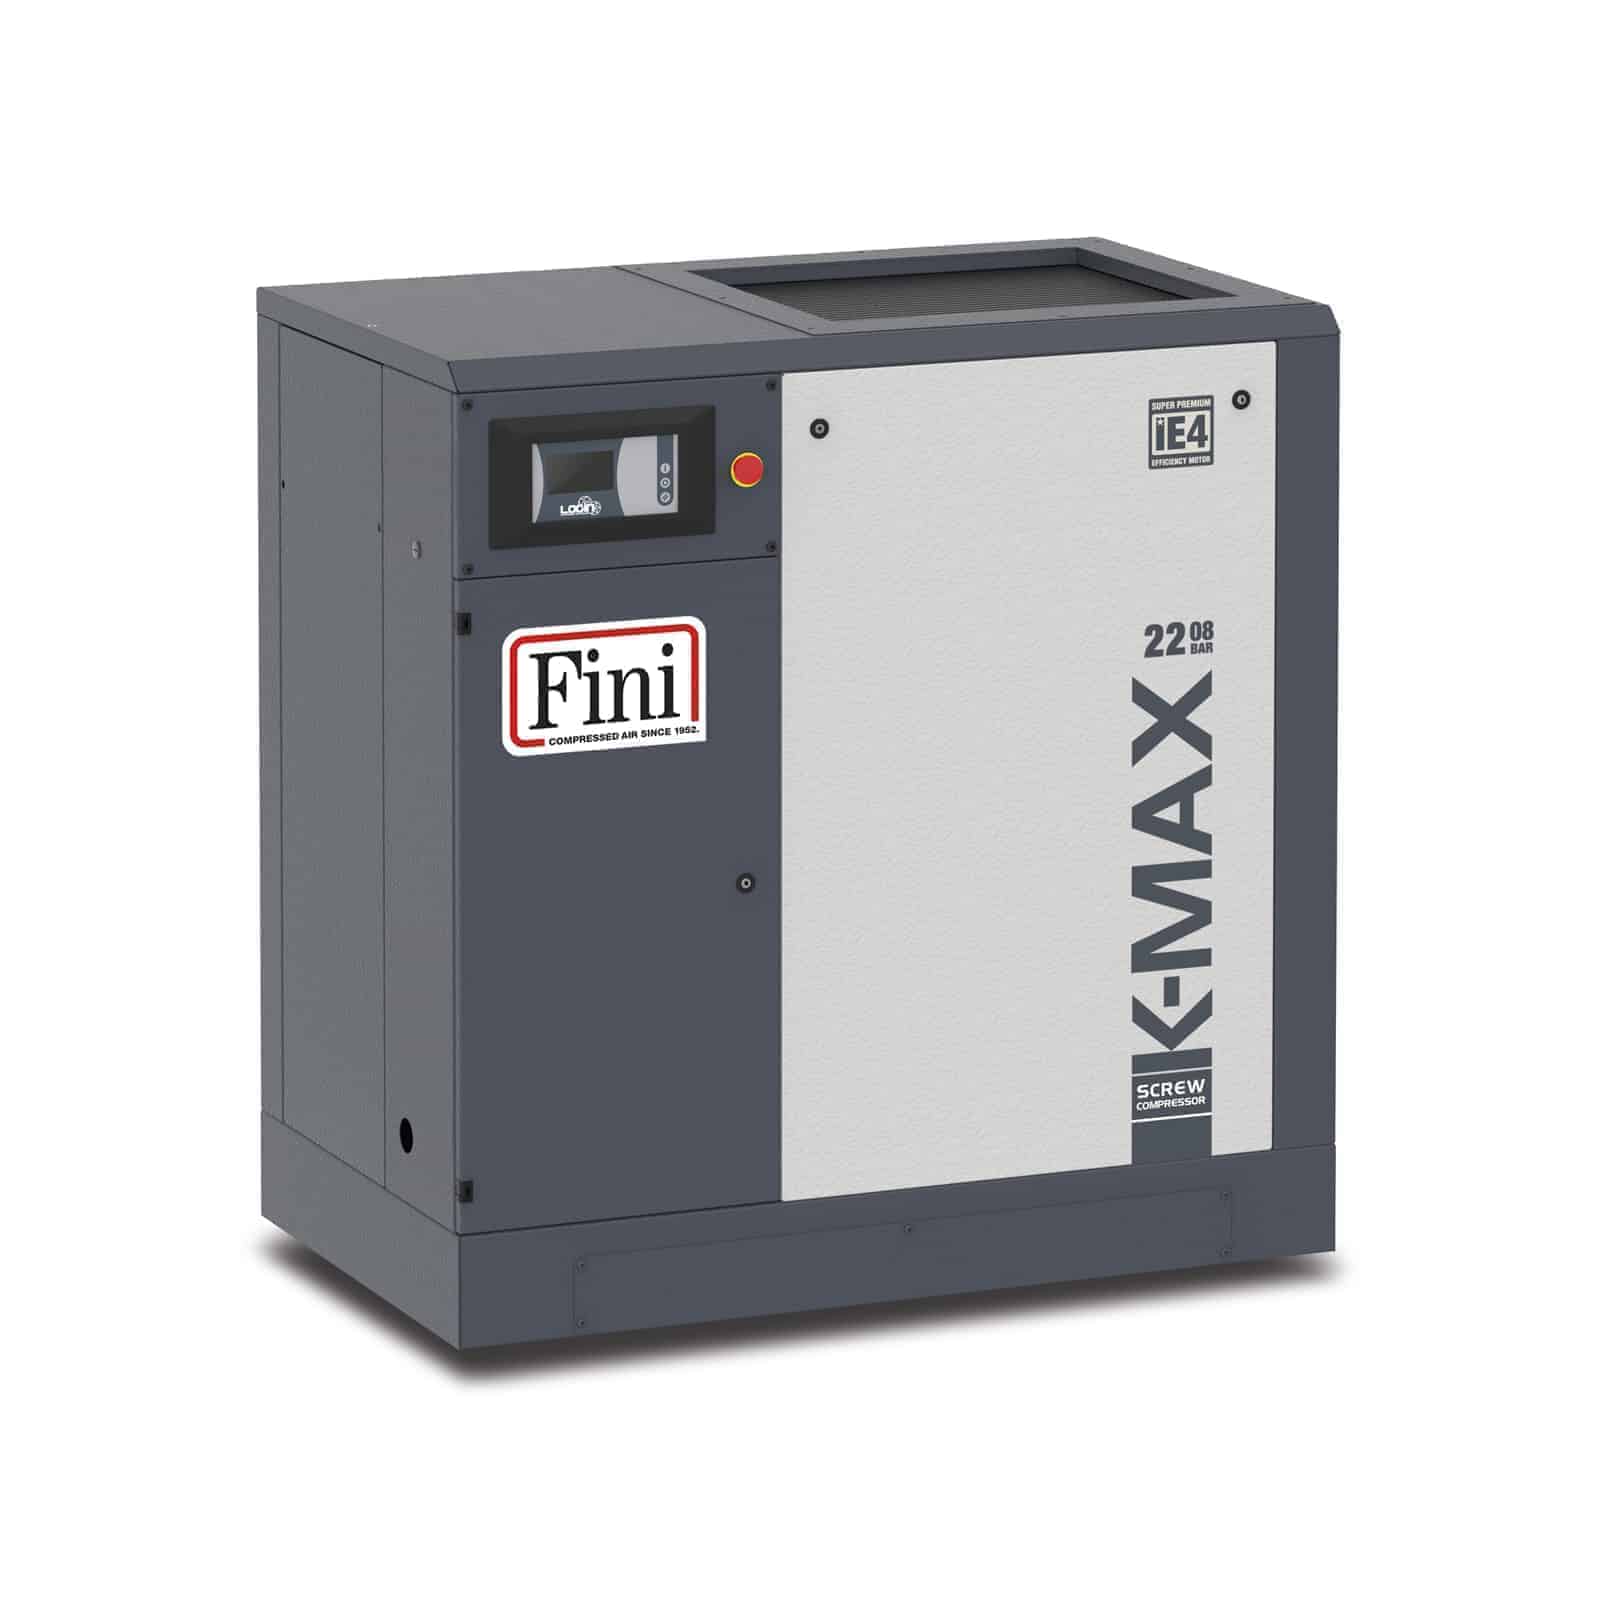 K-MAX 22-08 Highly efficient screw compressor, with direct drive transmission.